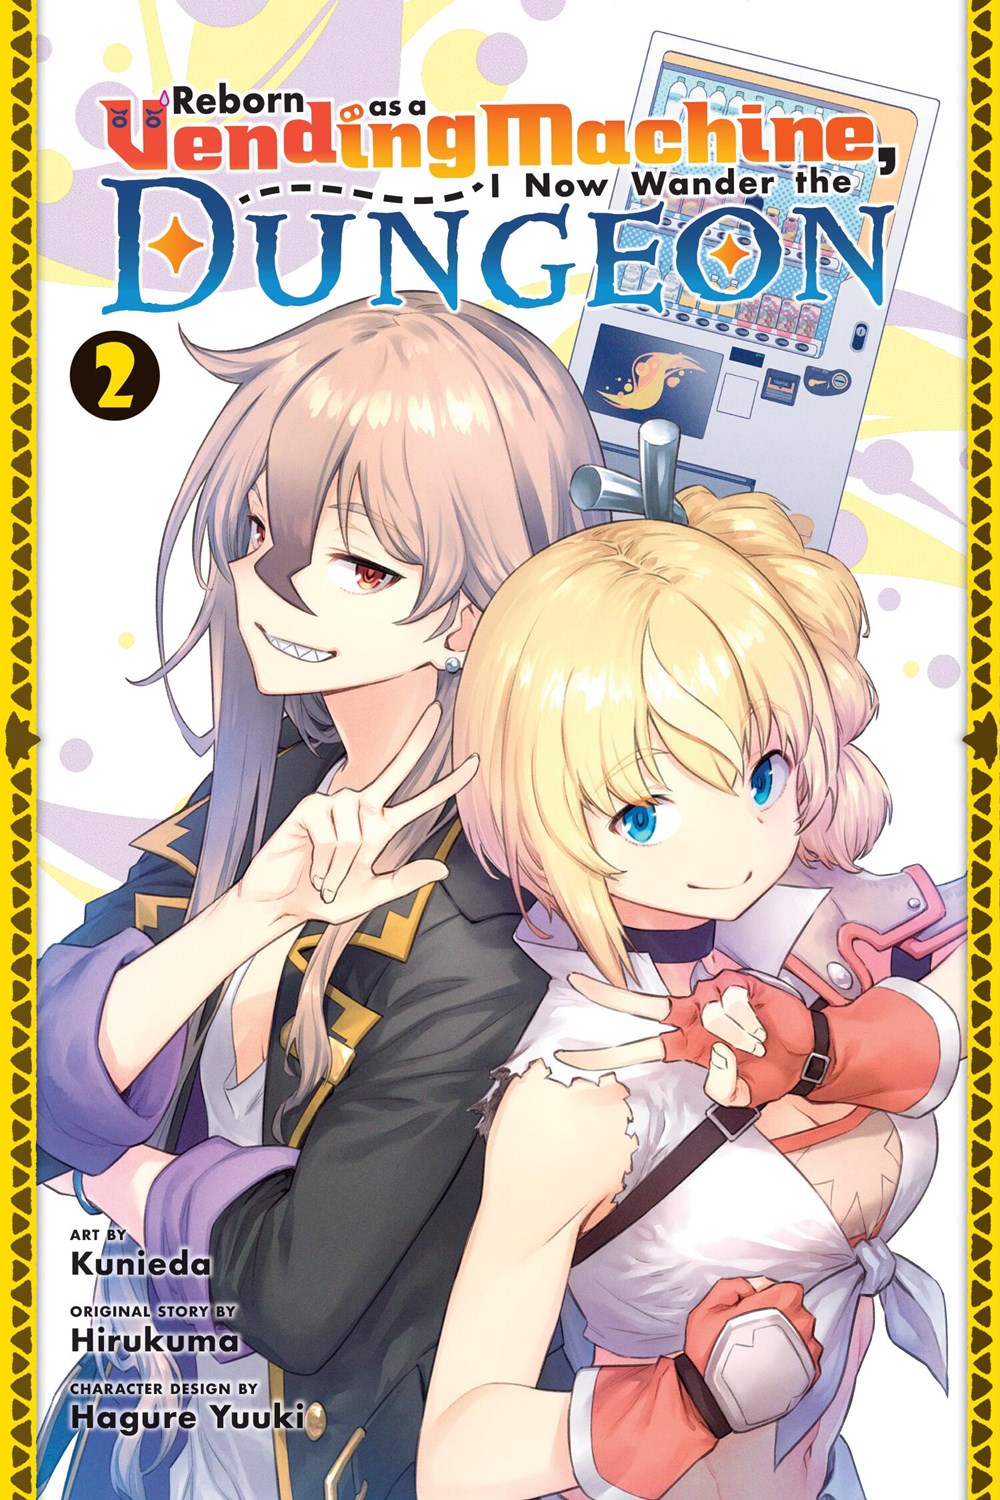 Reborn as a Vending Machine I Now Wander the Dungeon Manga Volume 2 image count 0